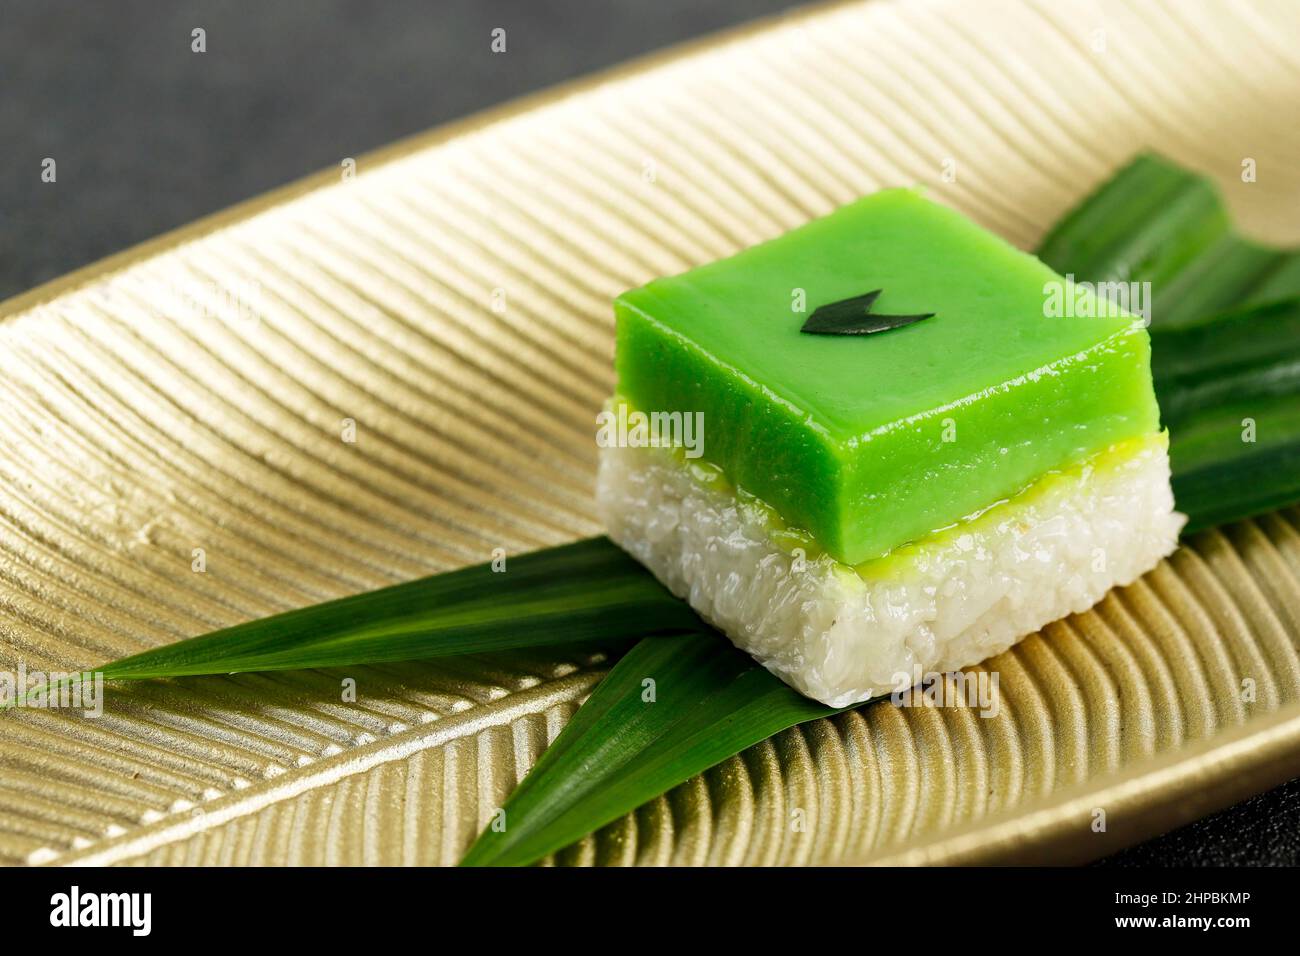 Talam Ketan or Kuih Seri Muka,  Two Layered Dessert with Steamed Glutinous Rice at the Bottom and Green Custard Layer Cake on Top. Stock Photo